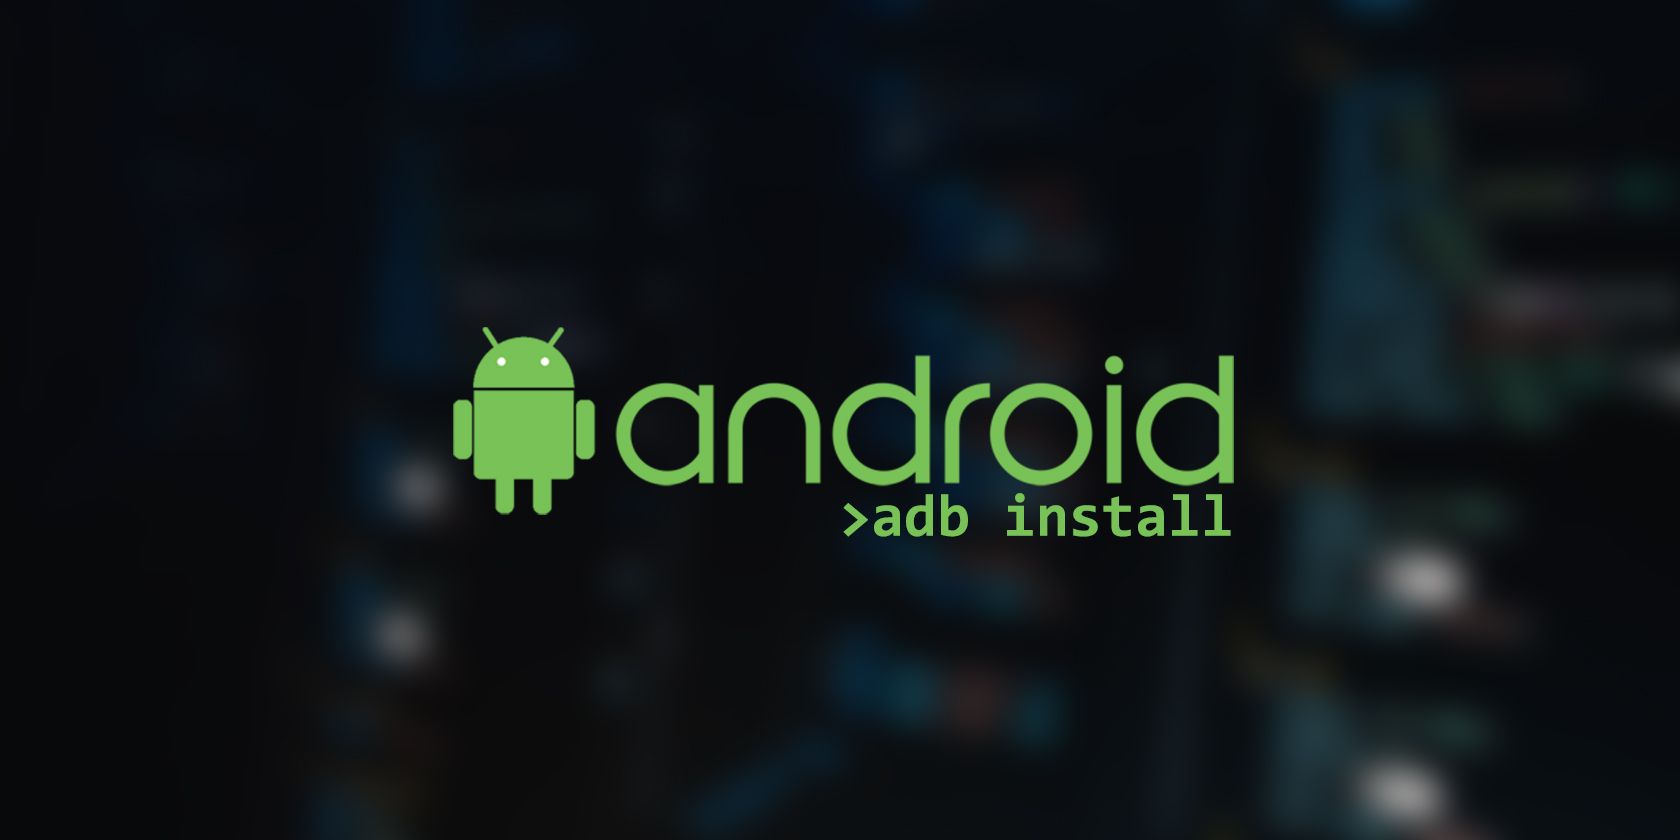 Android logo on a background.